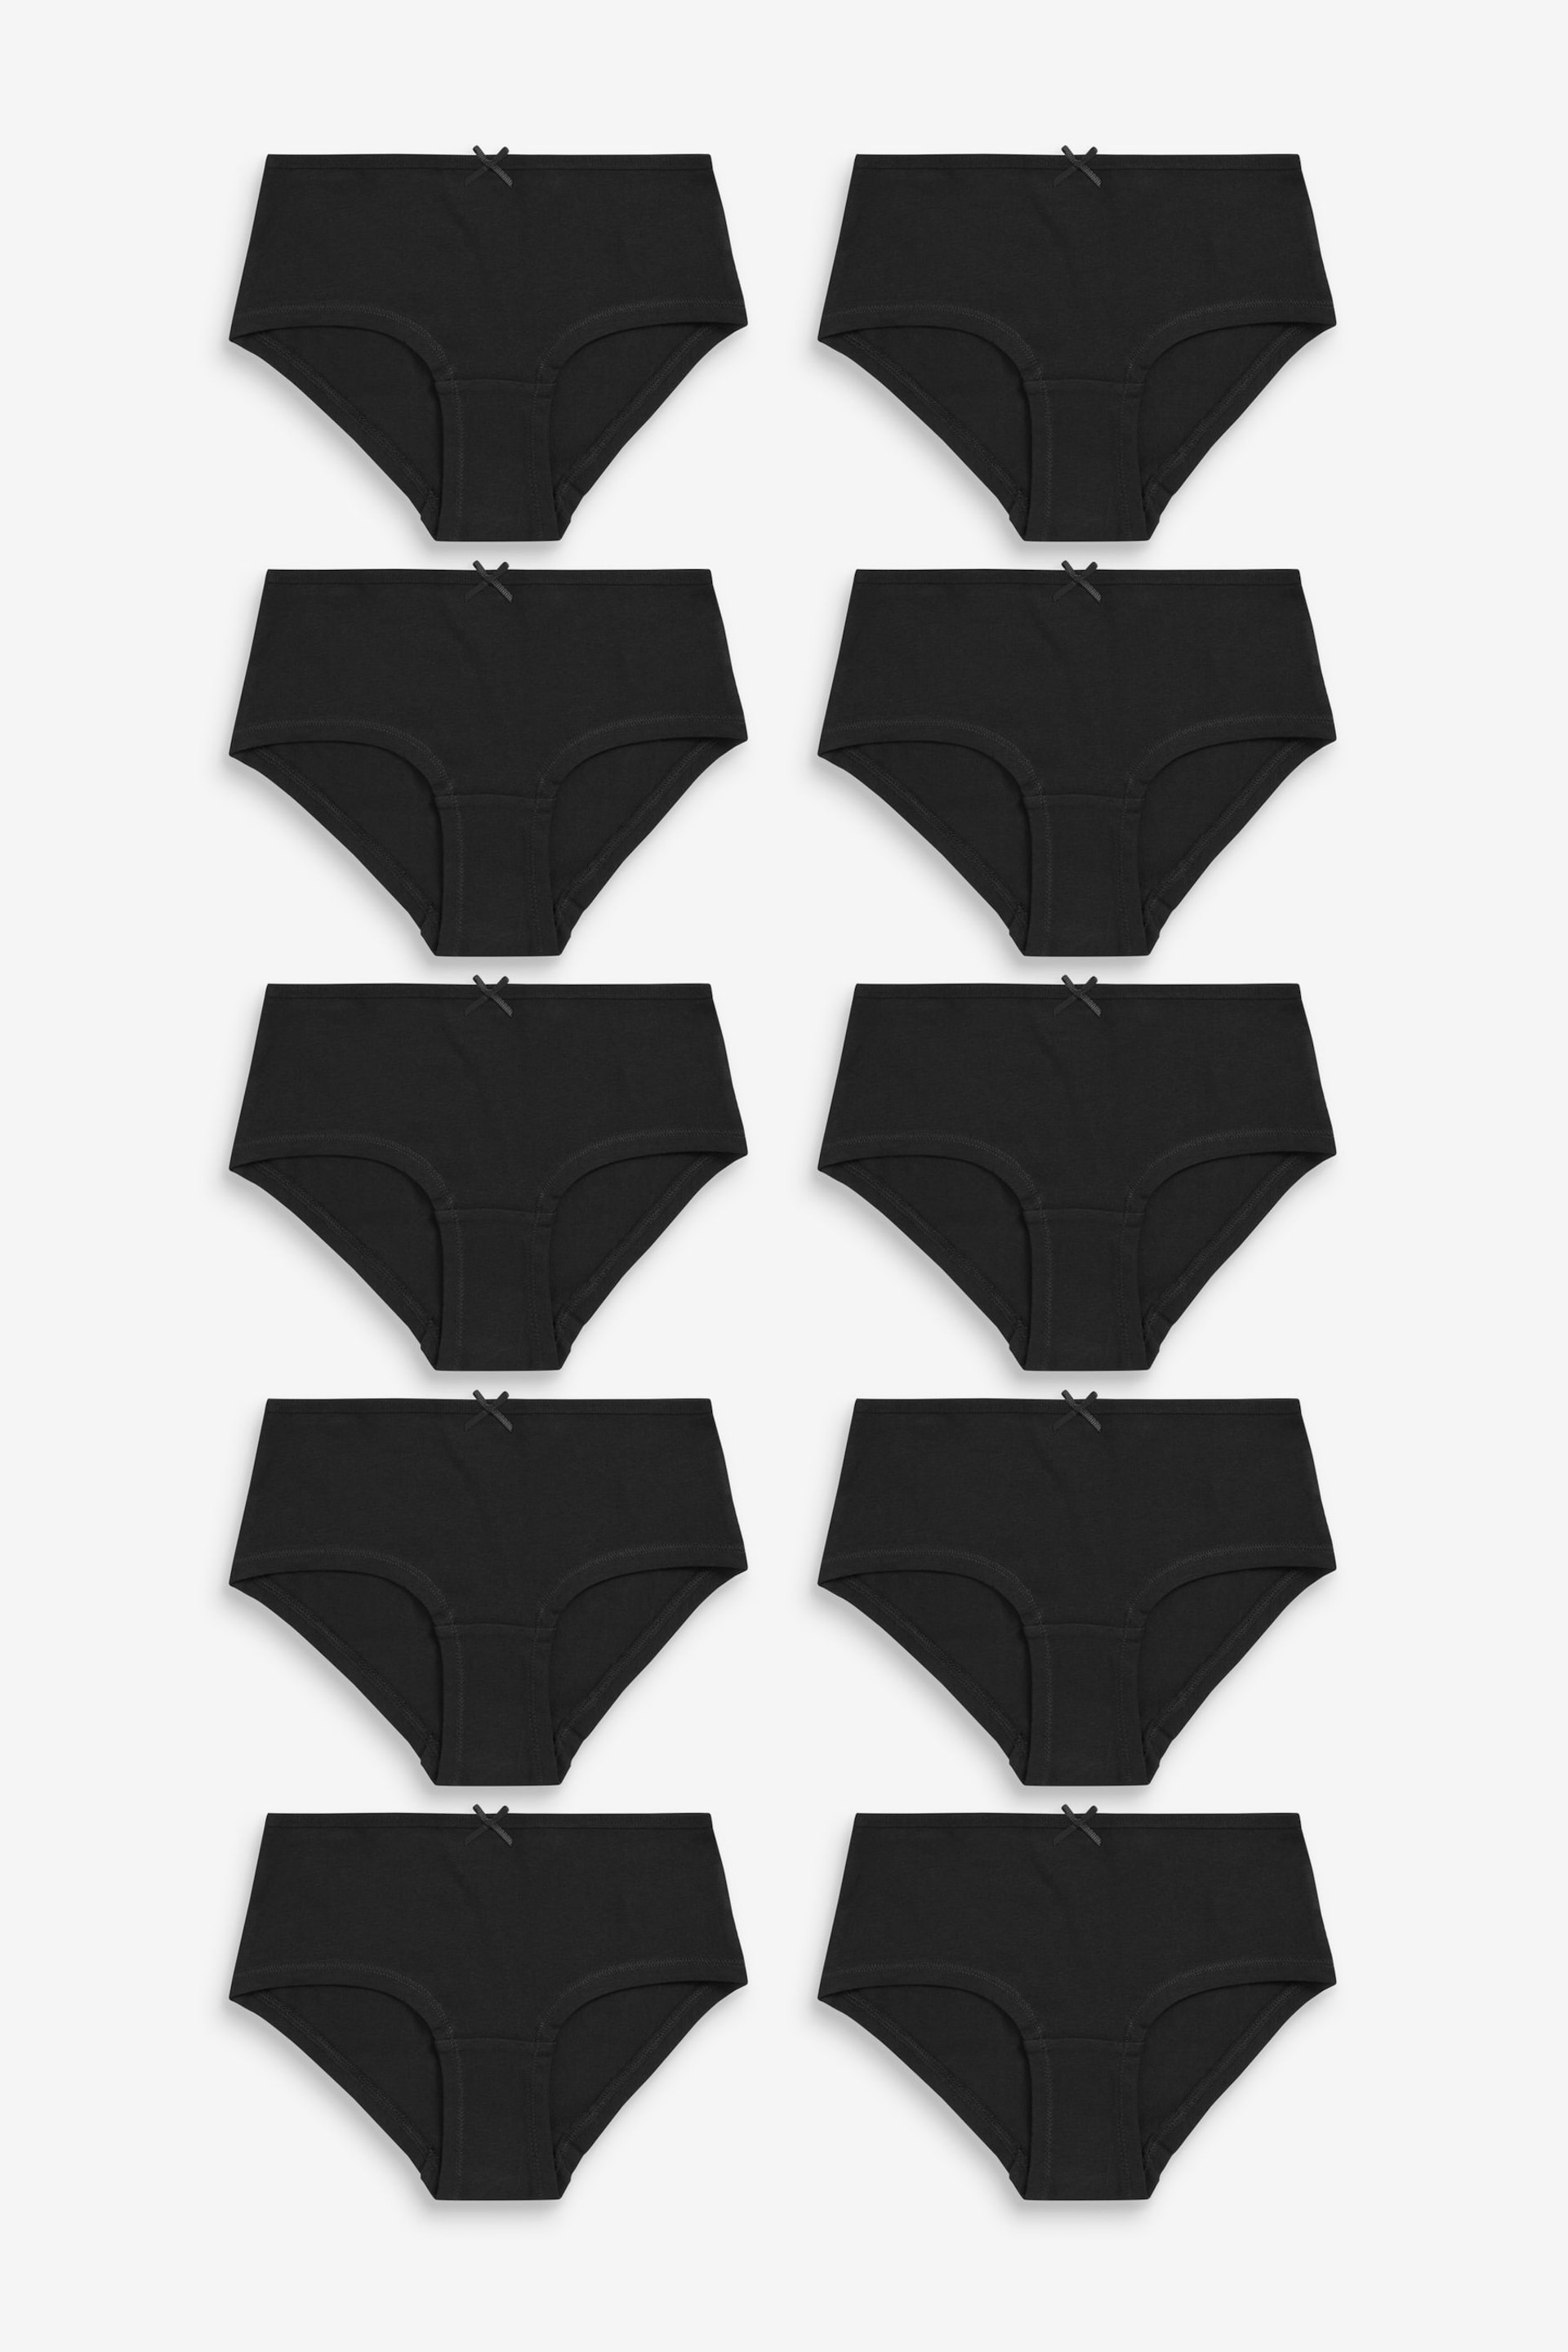 Black Elastic Hipster Briefs 10 Pack (2-16yrs) - Image 1 of 3